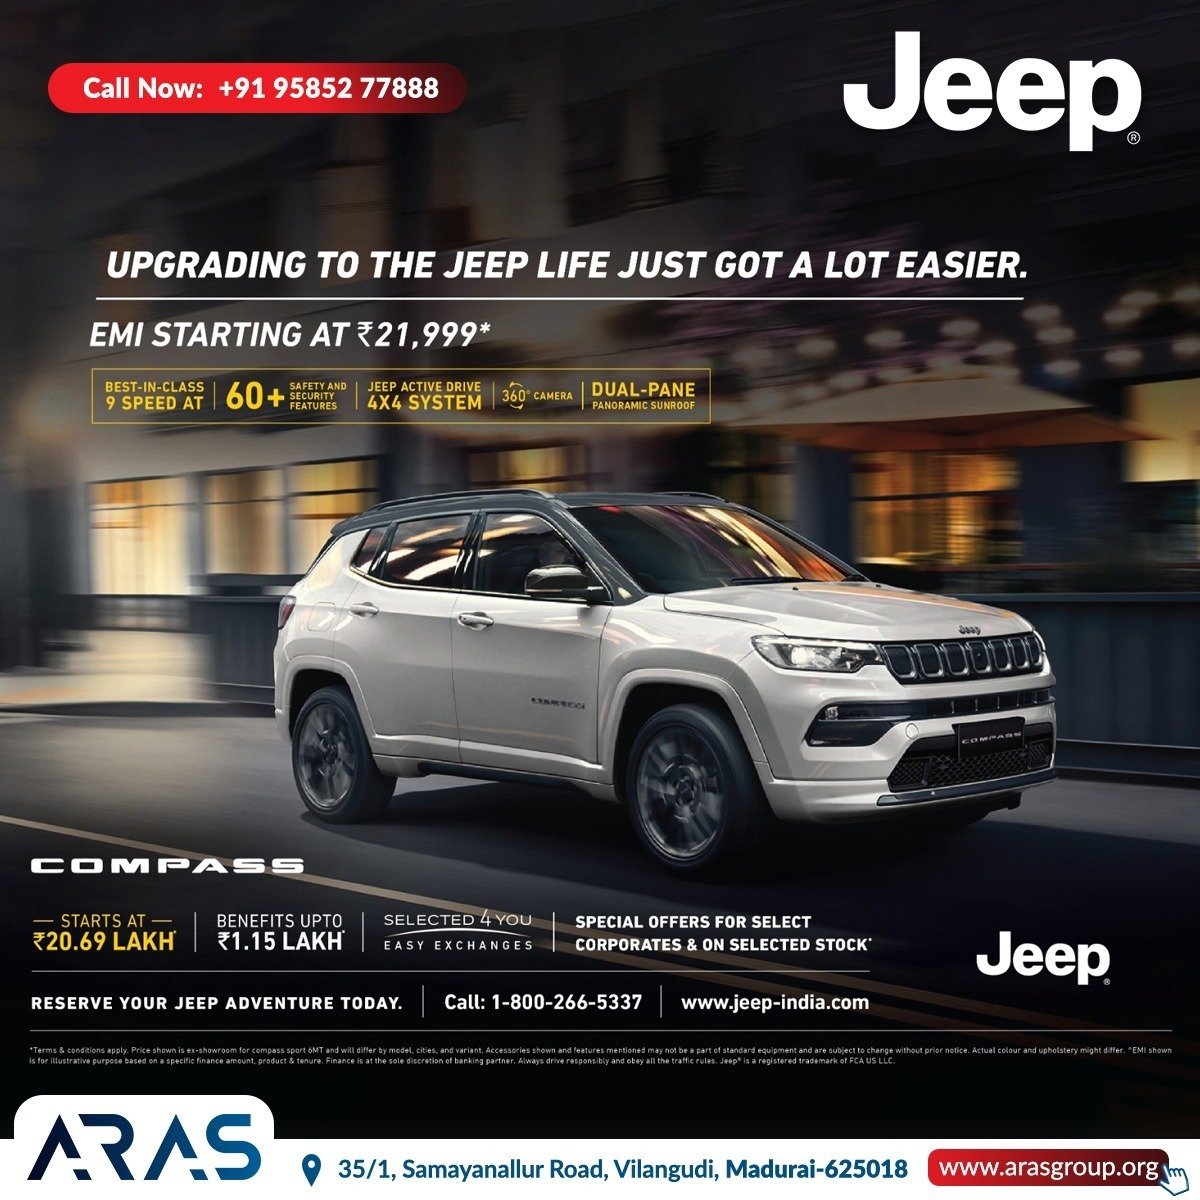 Jeep Pre Owned Vechicles Near Me | Jeep Showroom Near Me